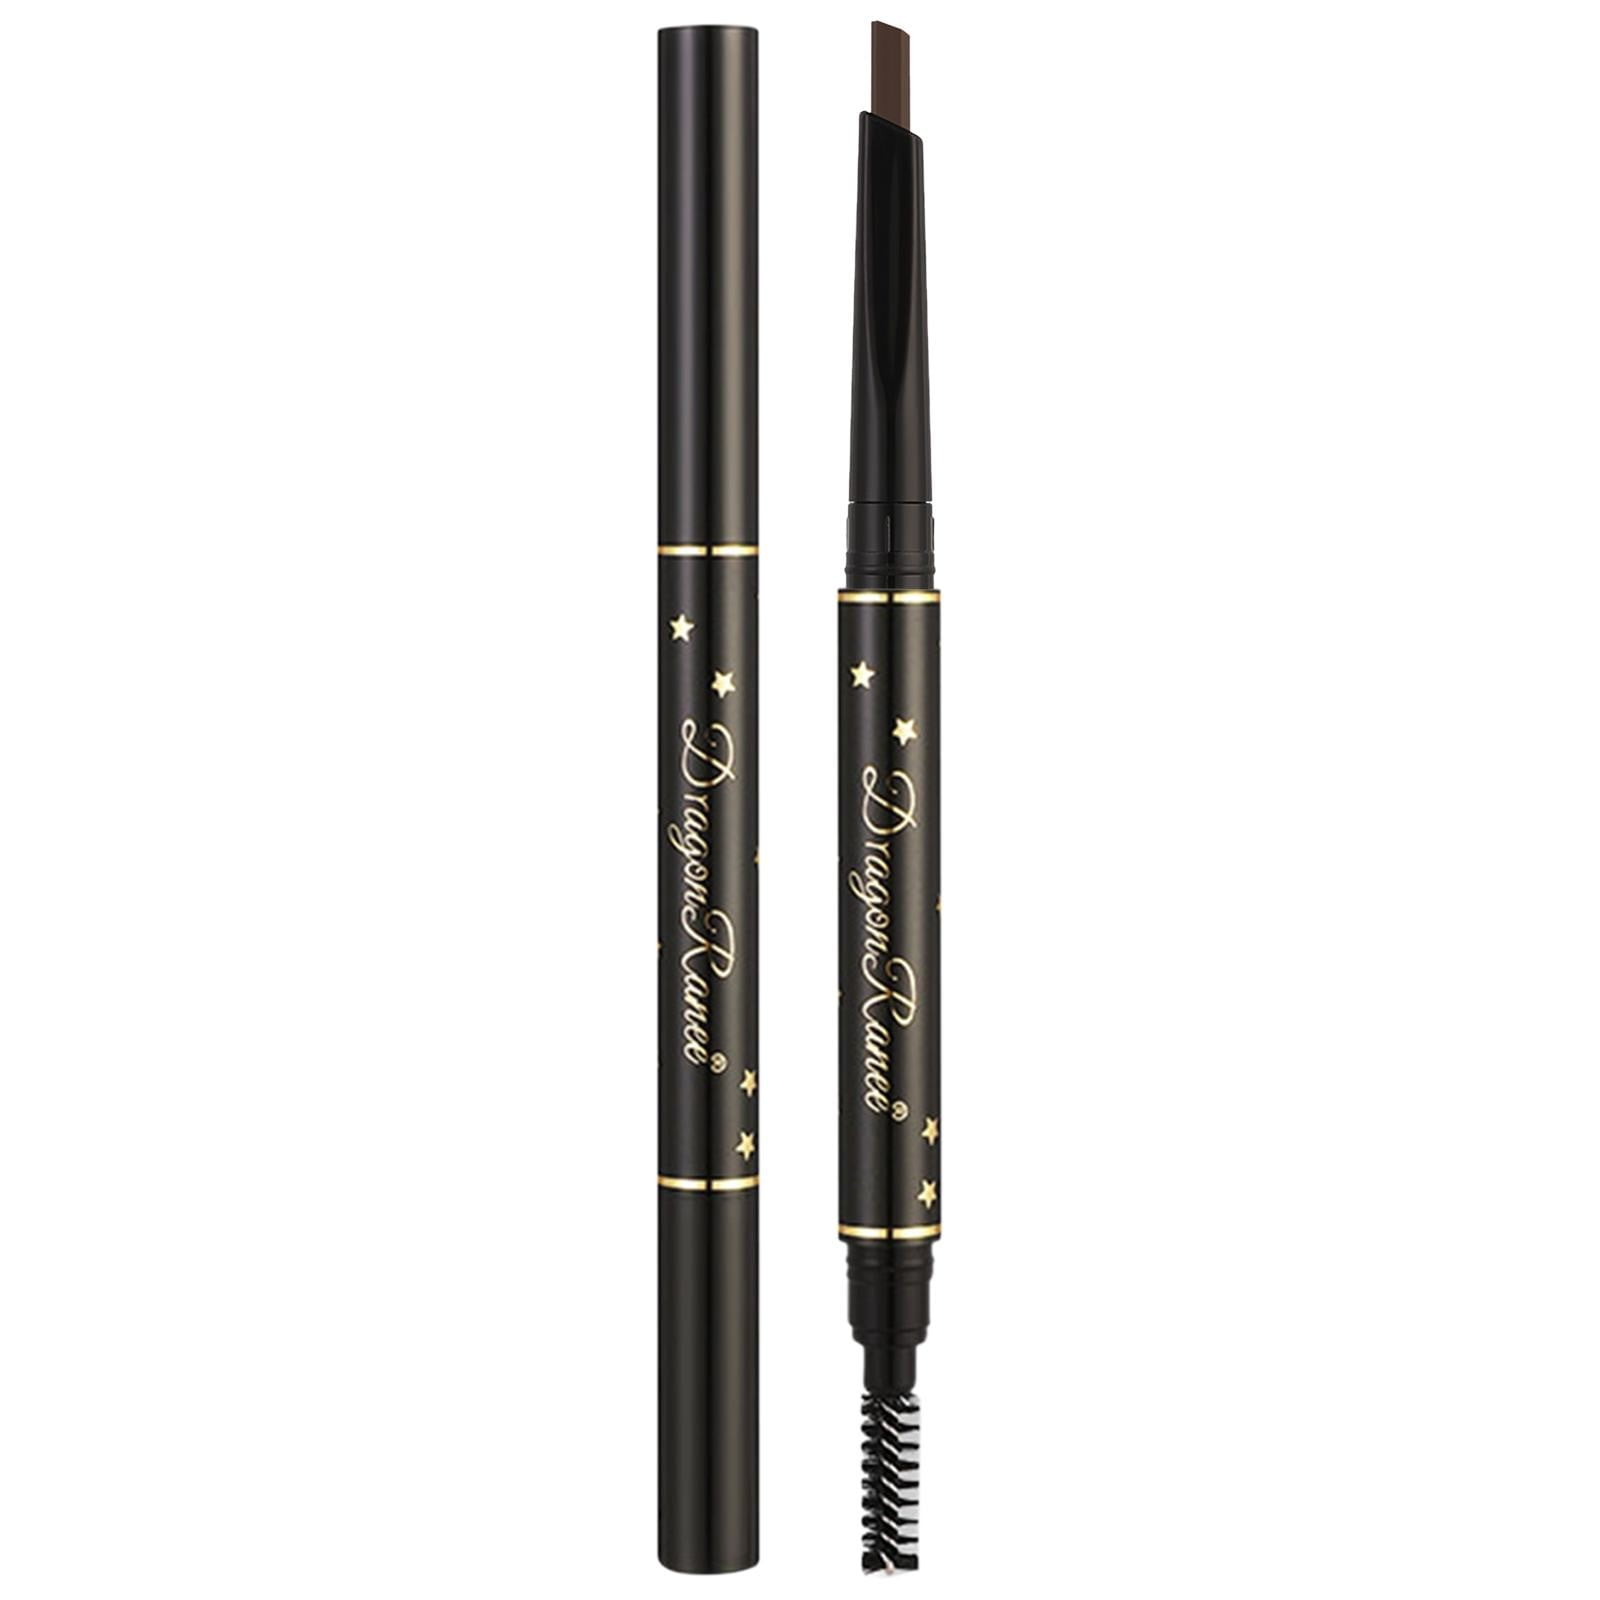 Brow Mapping Wax Pencils, White or Black